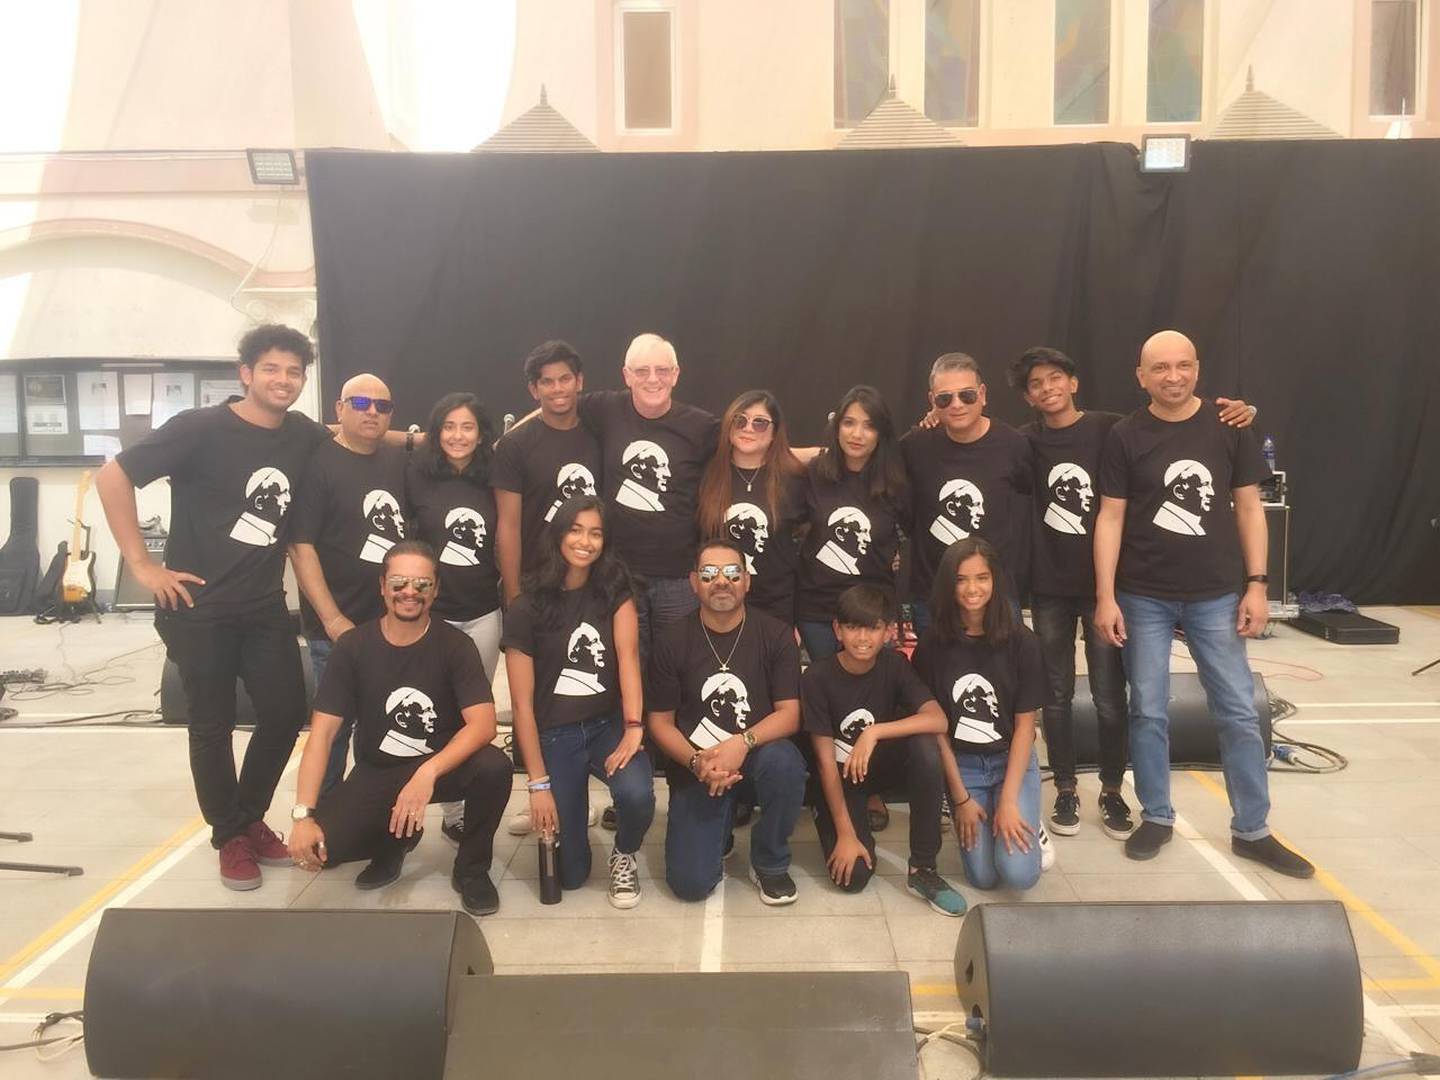 Members of Rock and Soul after they performed live for the congregation at St Francis of Assisi following a screening of Pope Francis's Mass in Abu Dhabi.